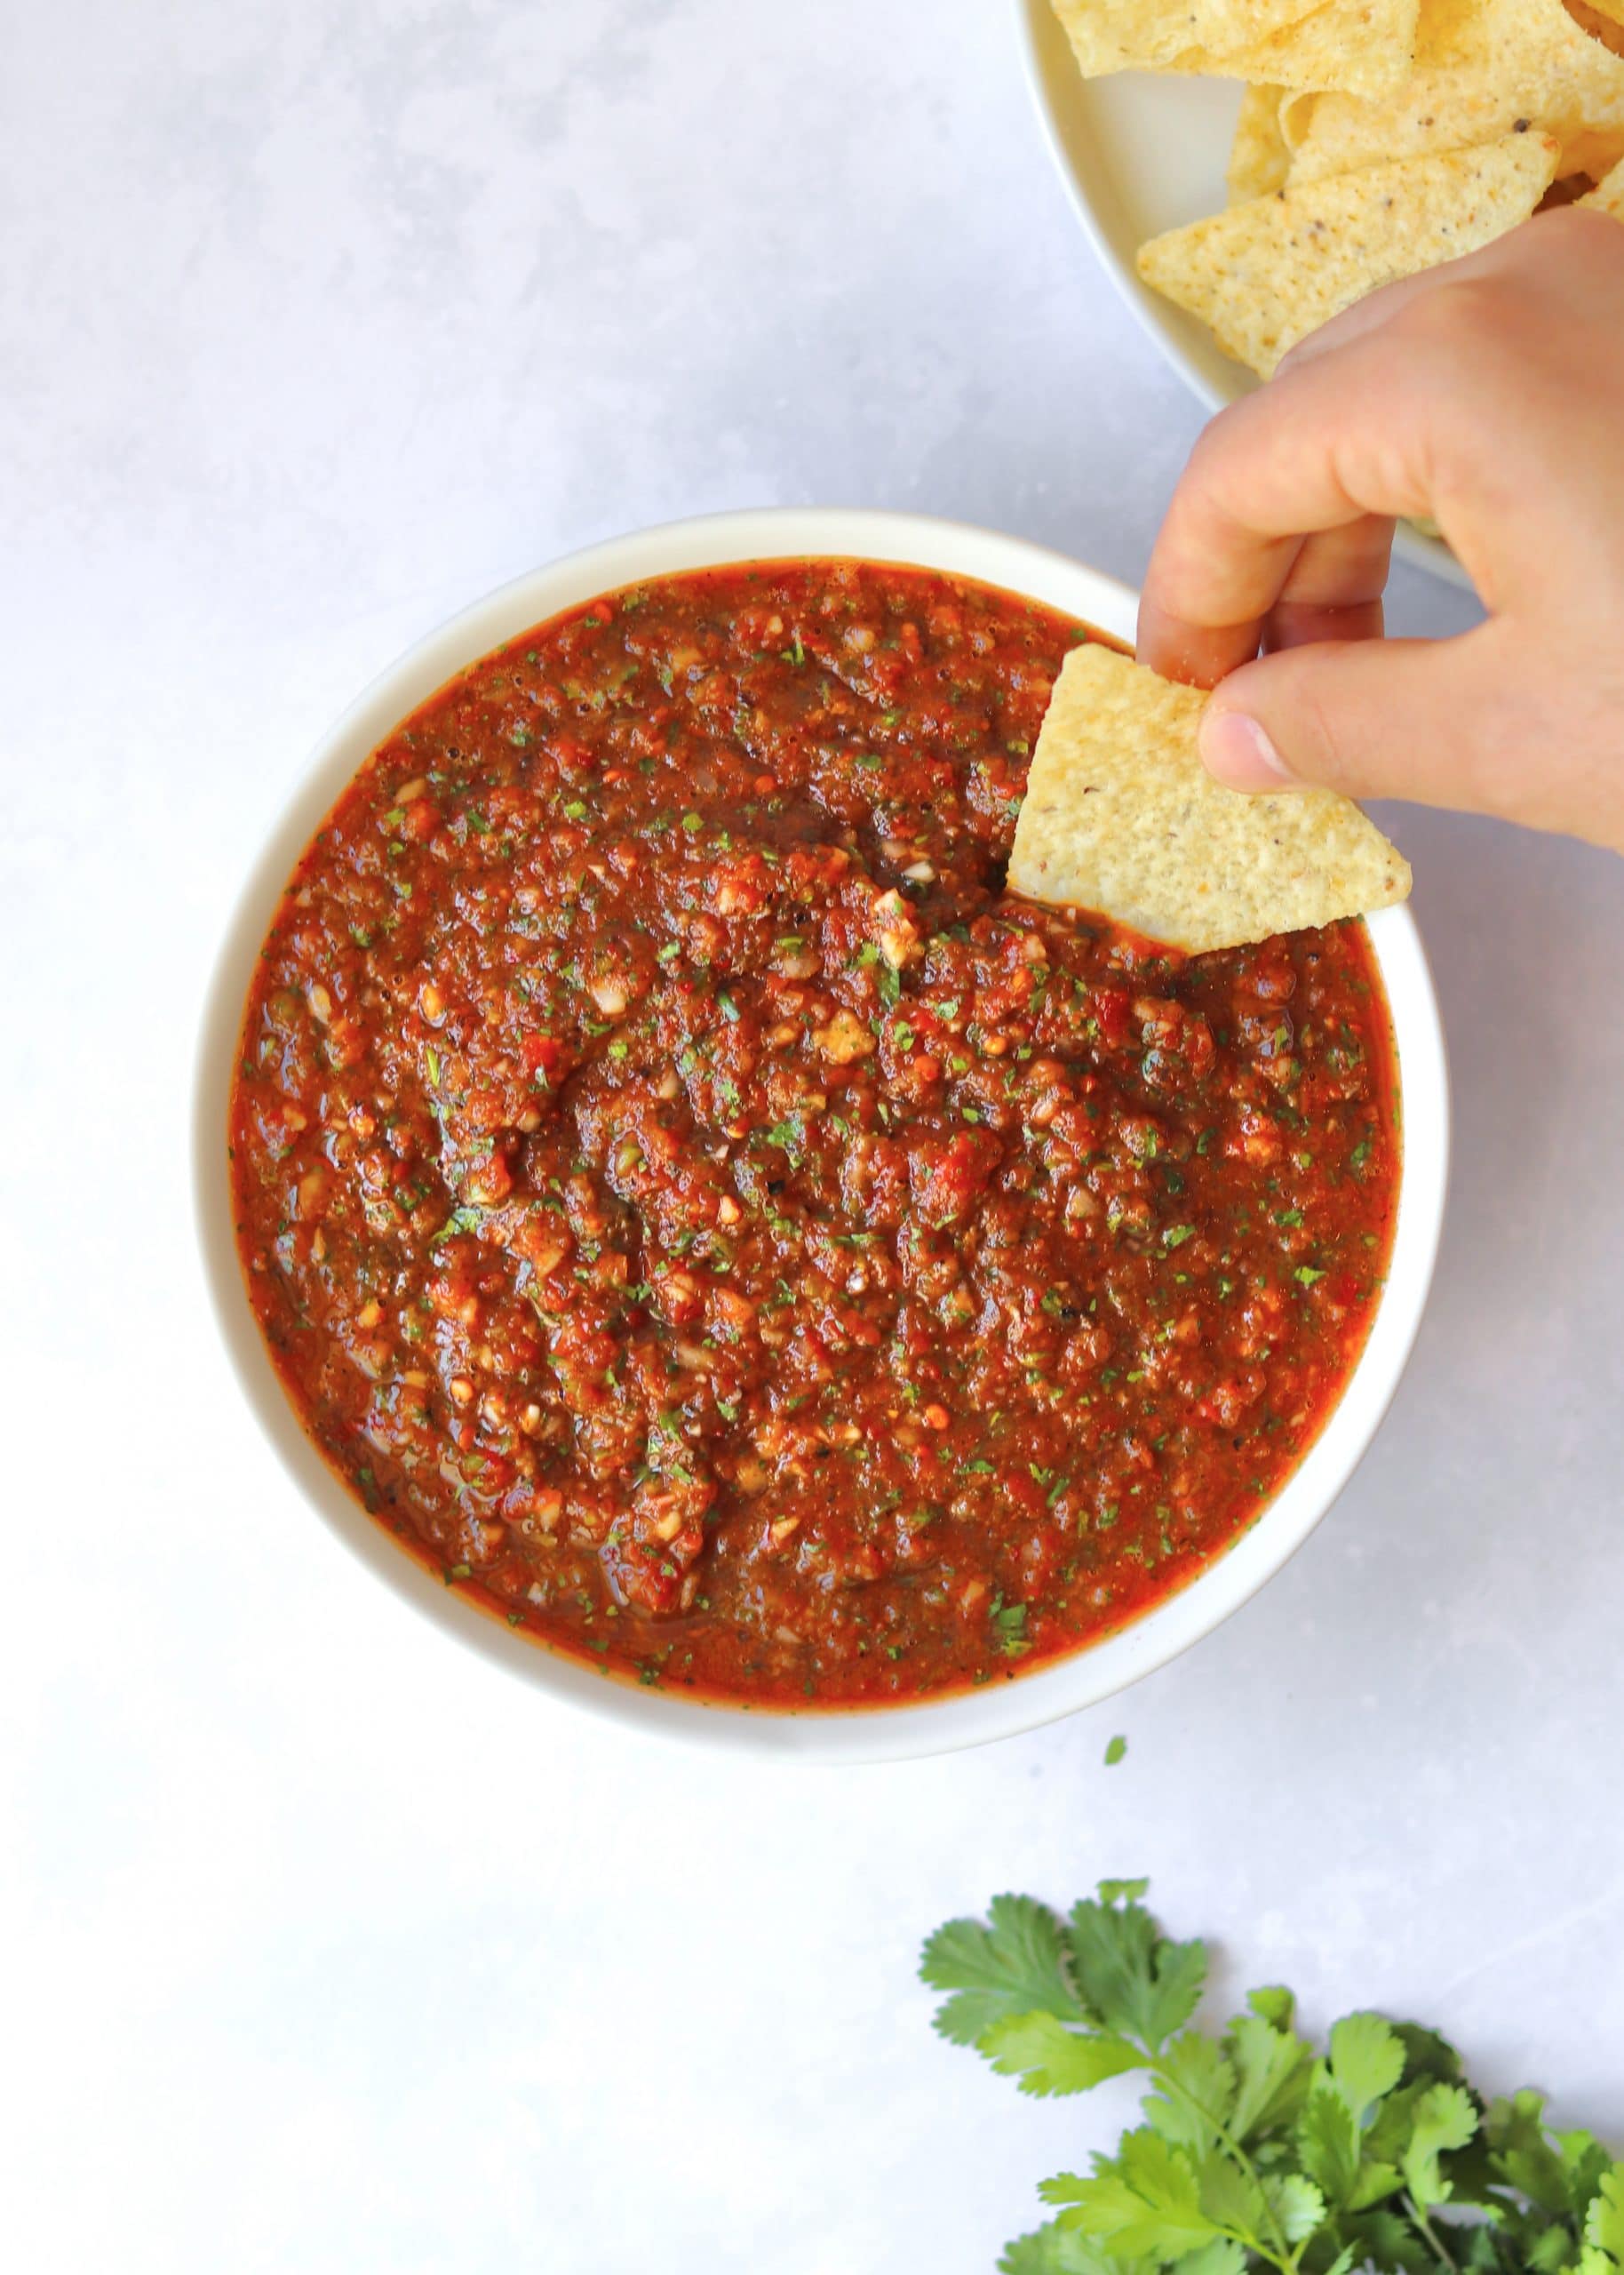 Hand dipping chip into bowl of salsa